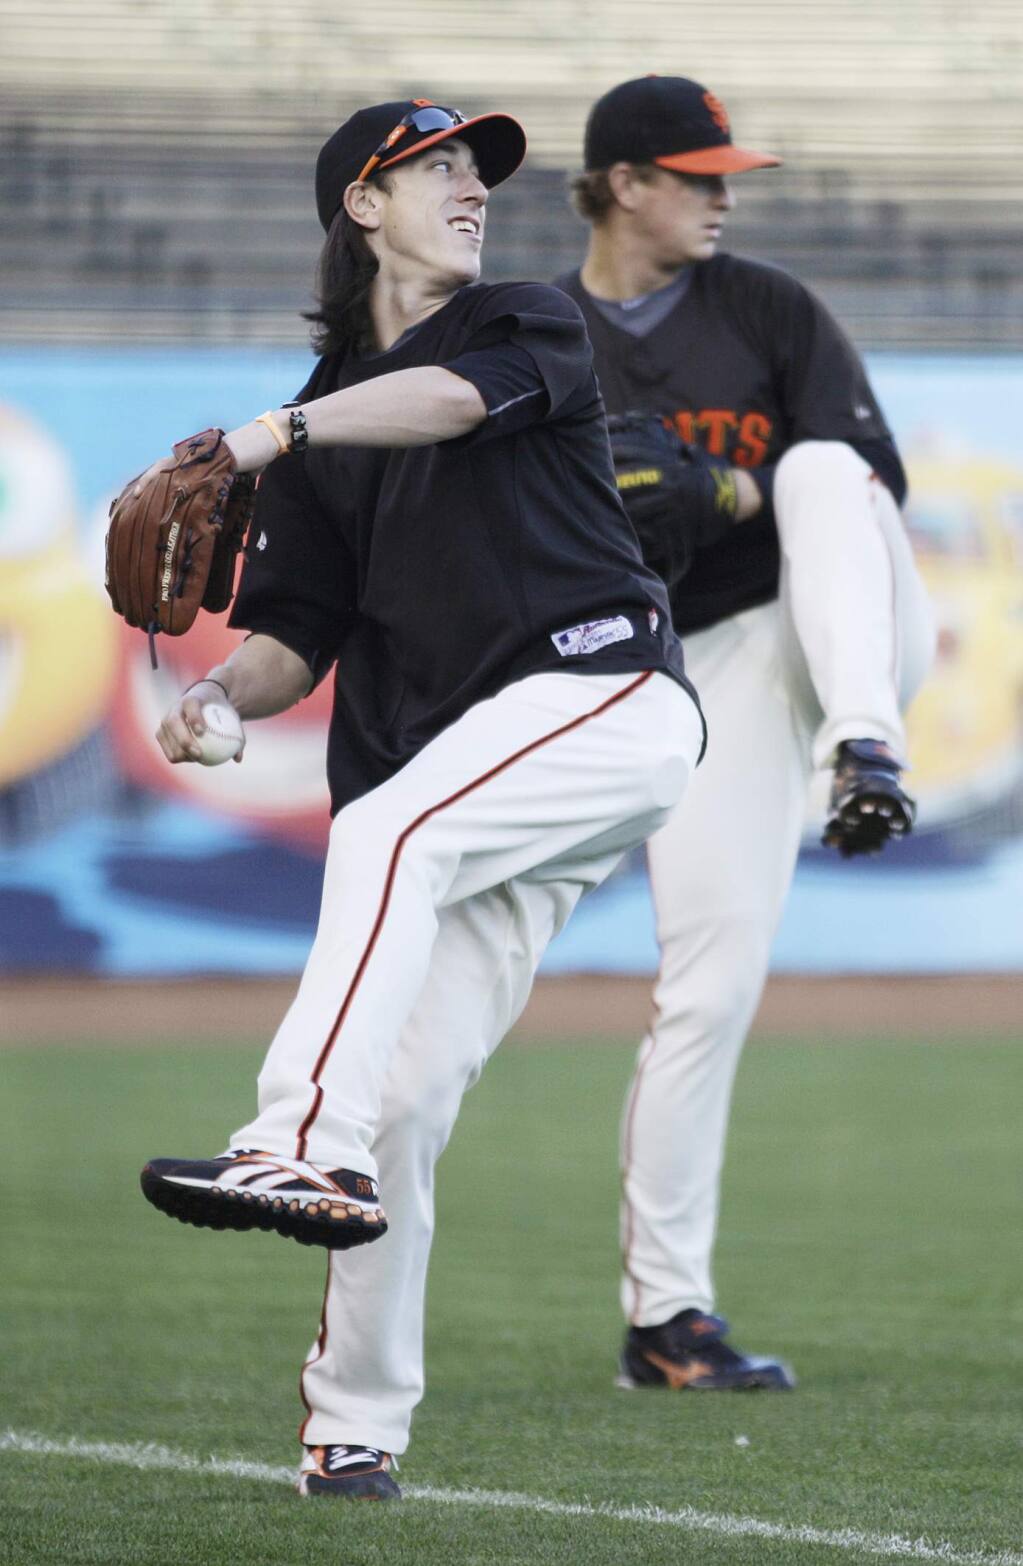 The real reason why Tim Lincecum hasn't pitched in a while. - post